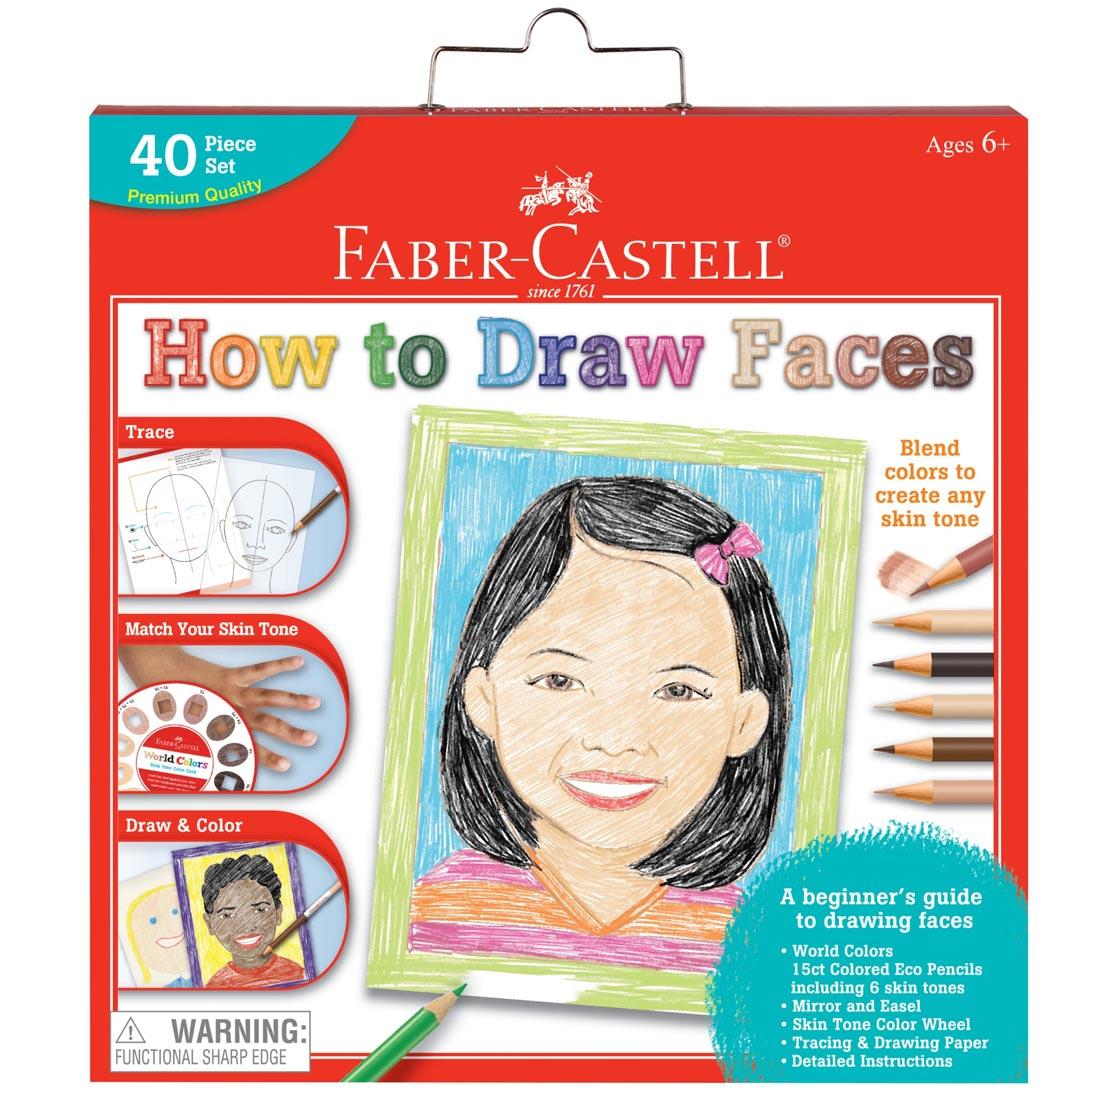 How To Draw Faces Set by Faber-Castell